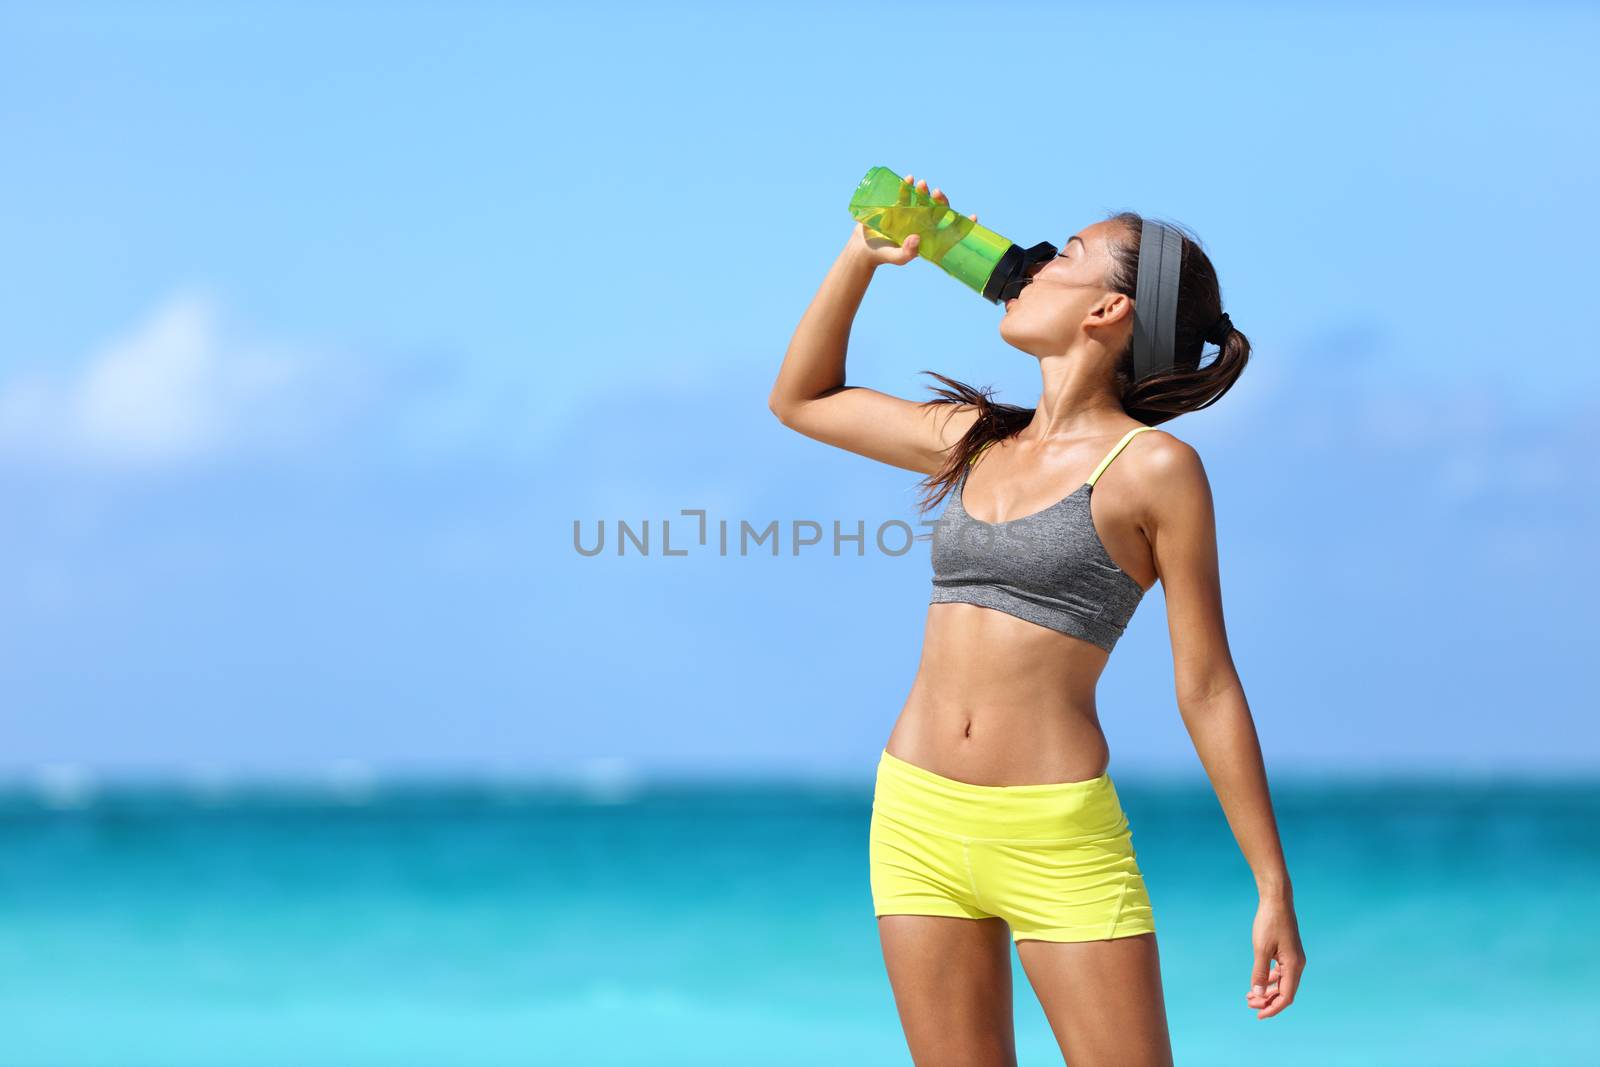 Fitness runner woman drinking water or energy drink of a sport bottle. Athlete girl taking a break during run to hydrate during hot summer exercise on beach. Healthy active lifestyle.